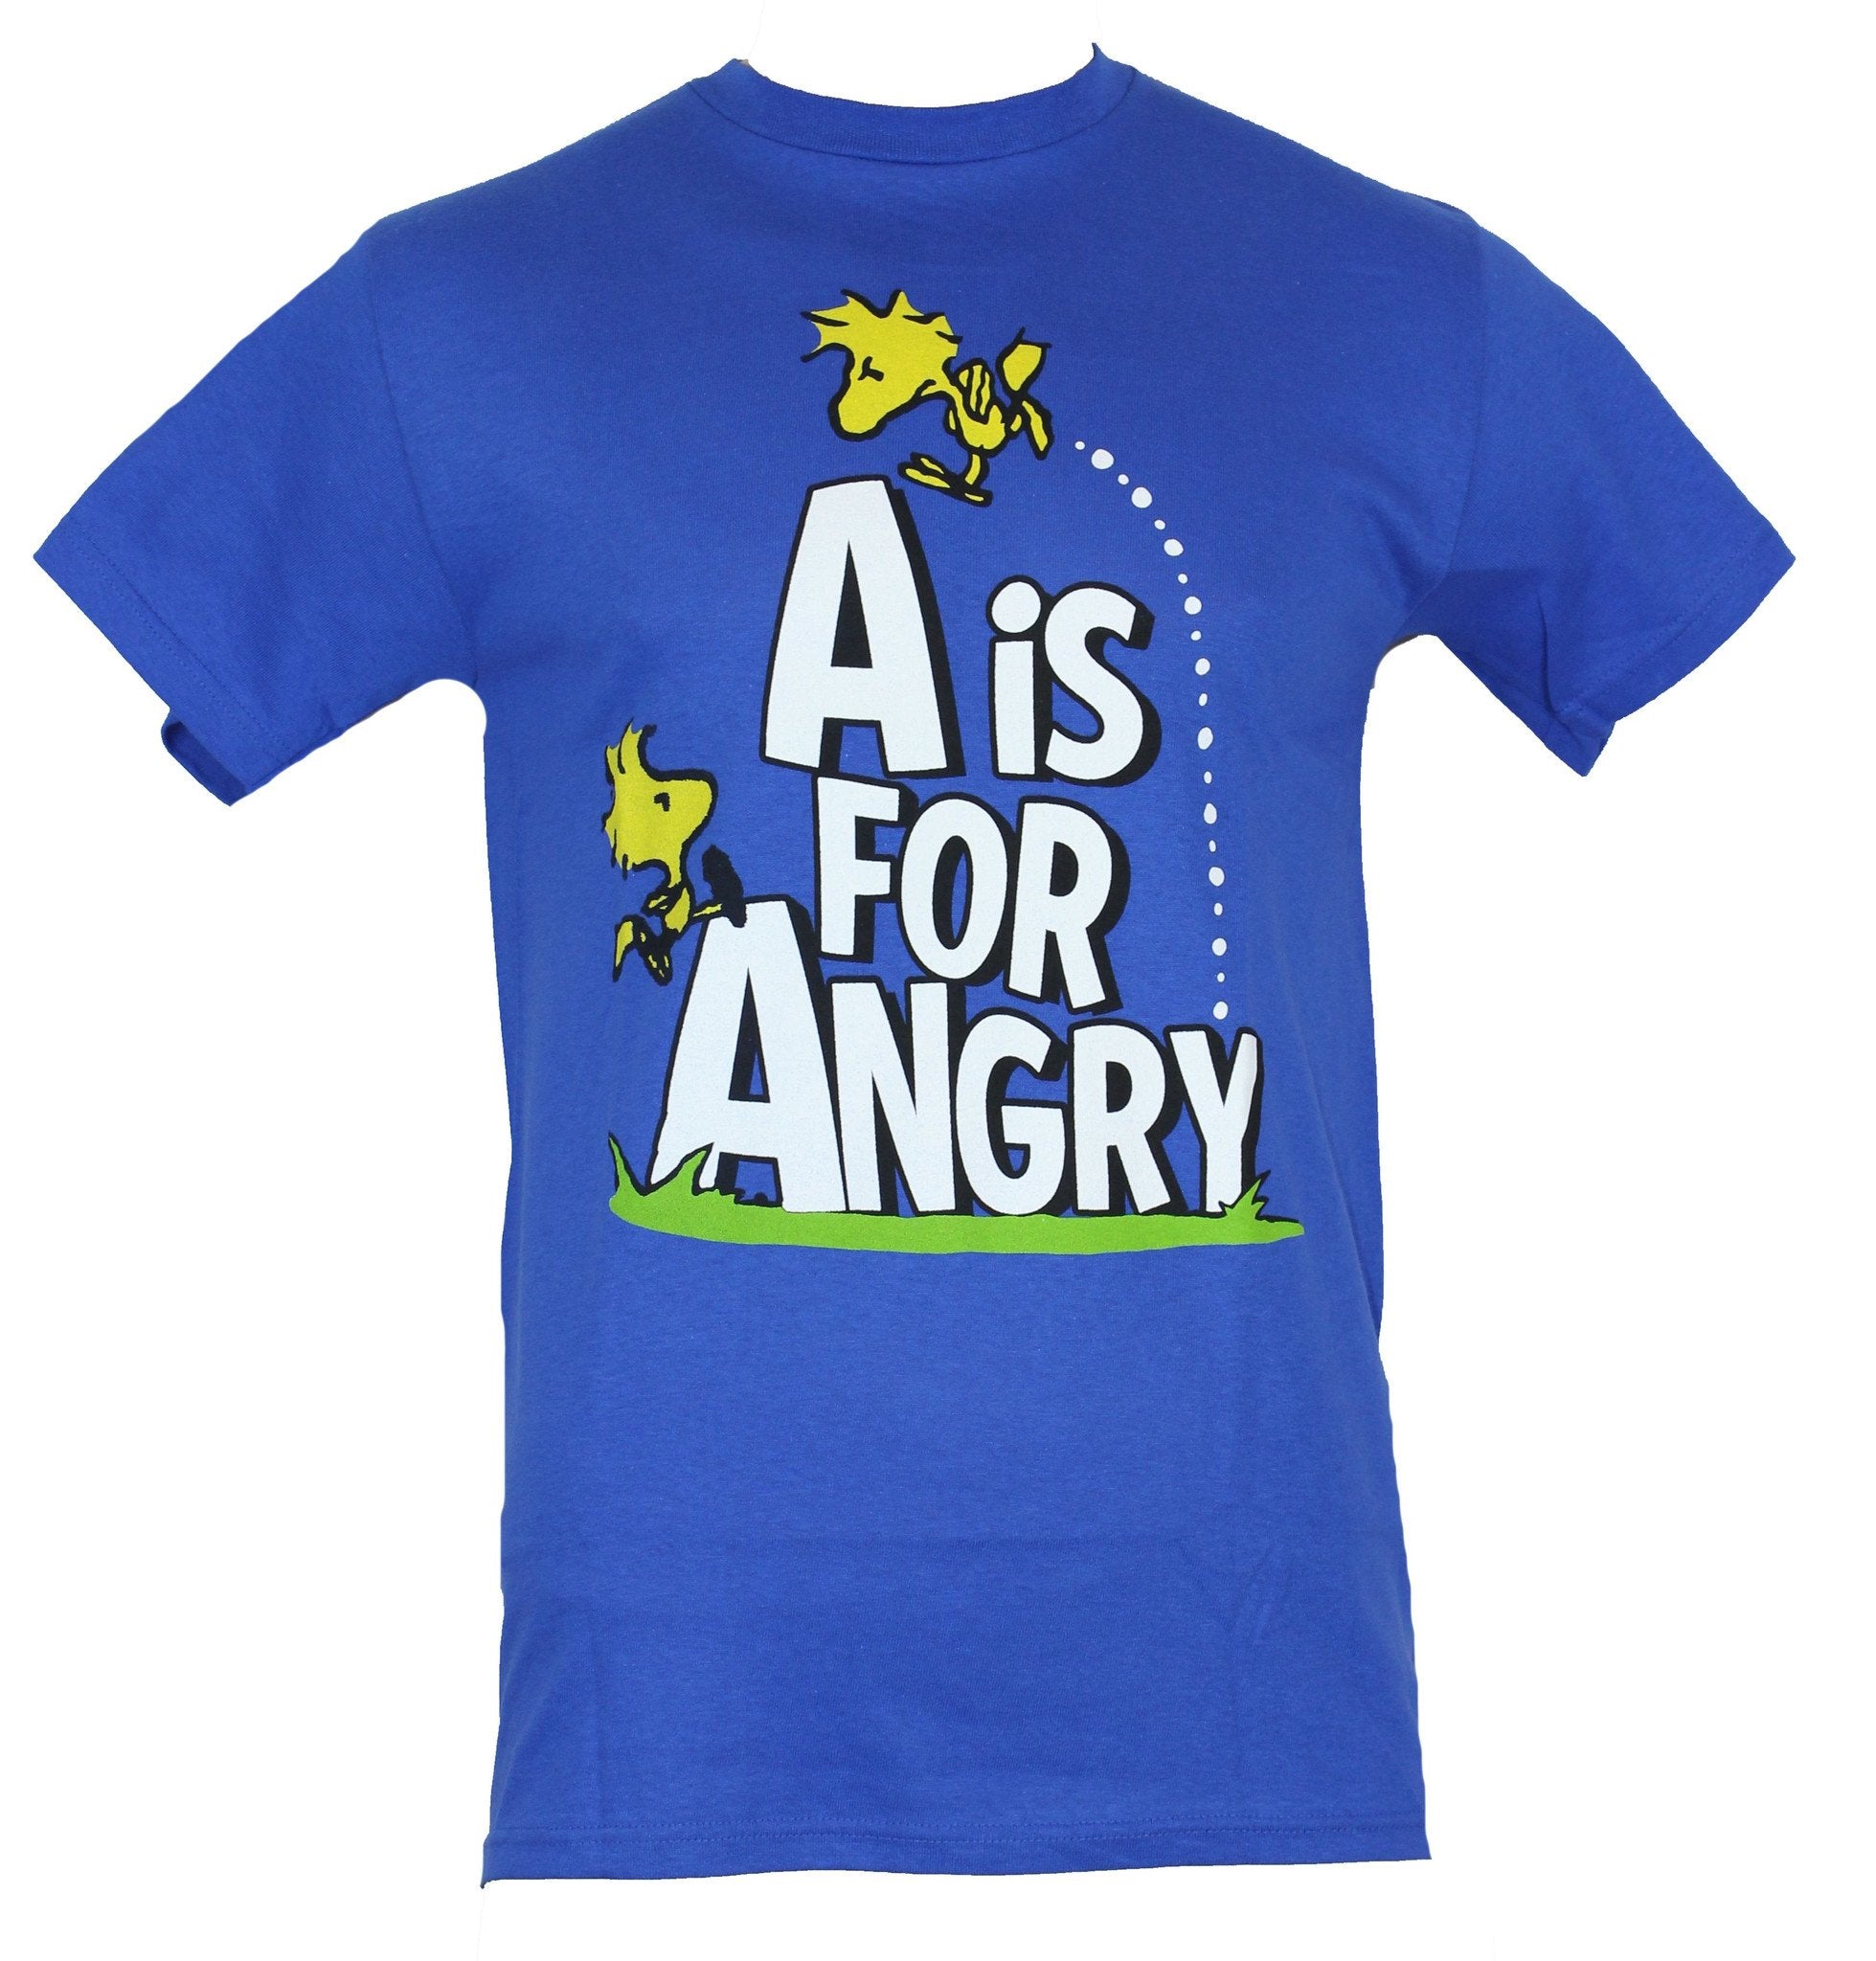 Peanuts Mens T-Shirt - "A is for Angry" 2 Woodstocks Playing On Logo Image